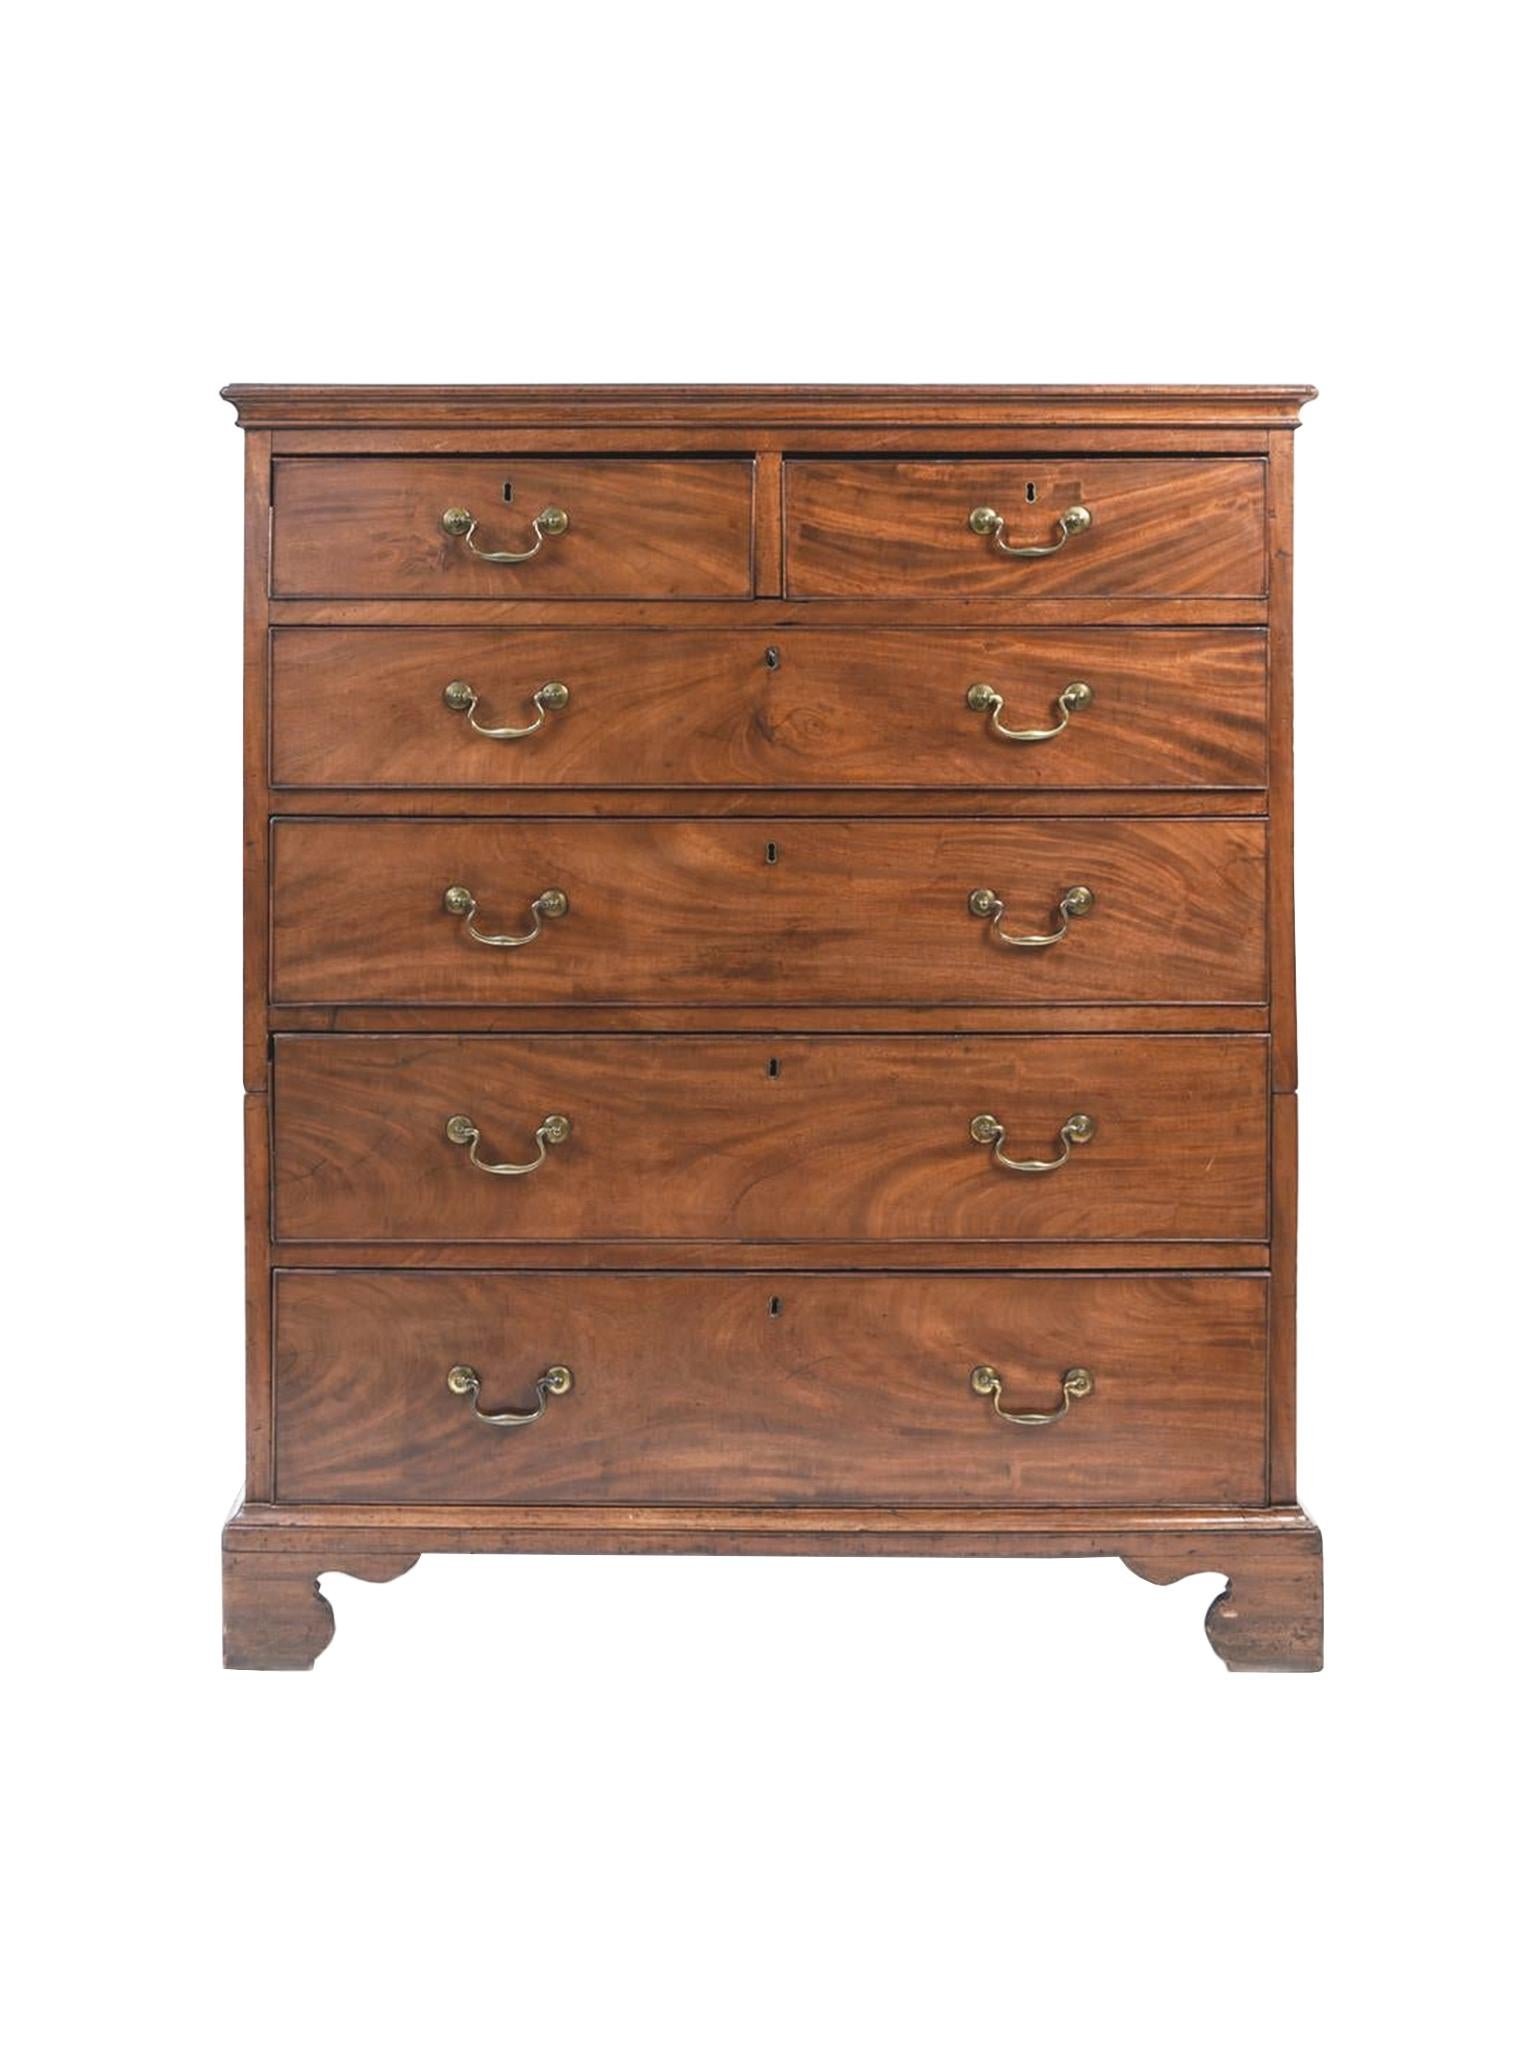 A beautiful Georgian chest of drawers hand-crafted from a warm-toned mahogany wood and equipped with brass bail pulls. Made in England, 1770s-1780s. It is constructed with two sections: the upper section is a flattop with 2 small drawers atop 2